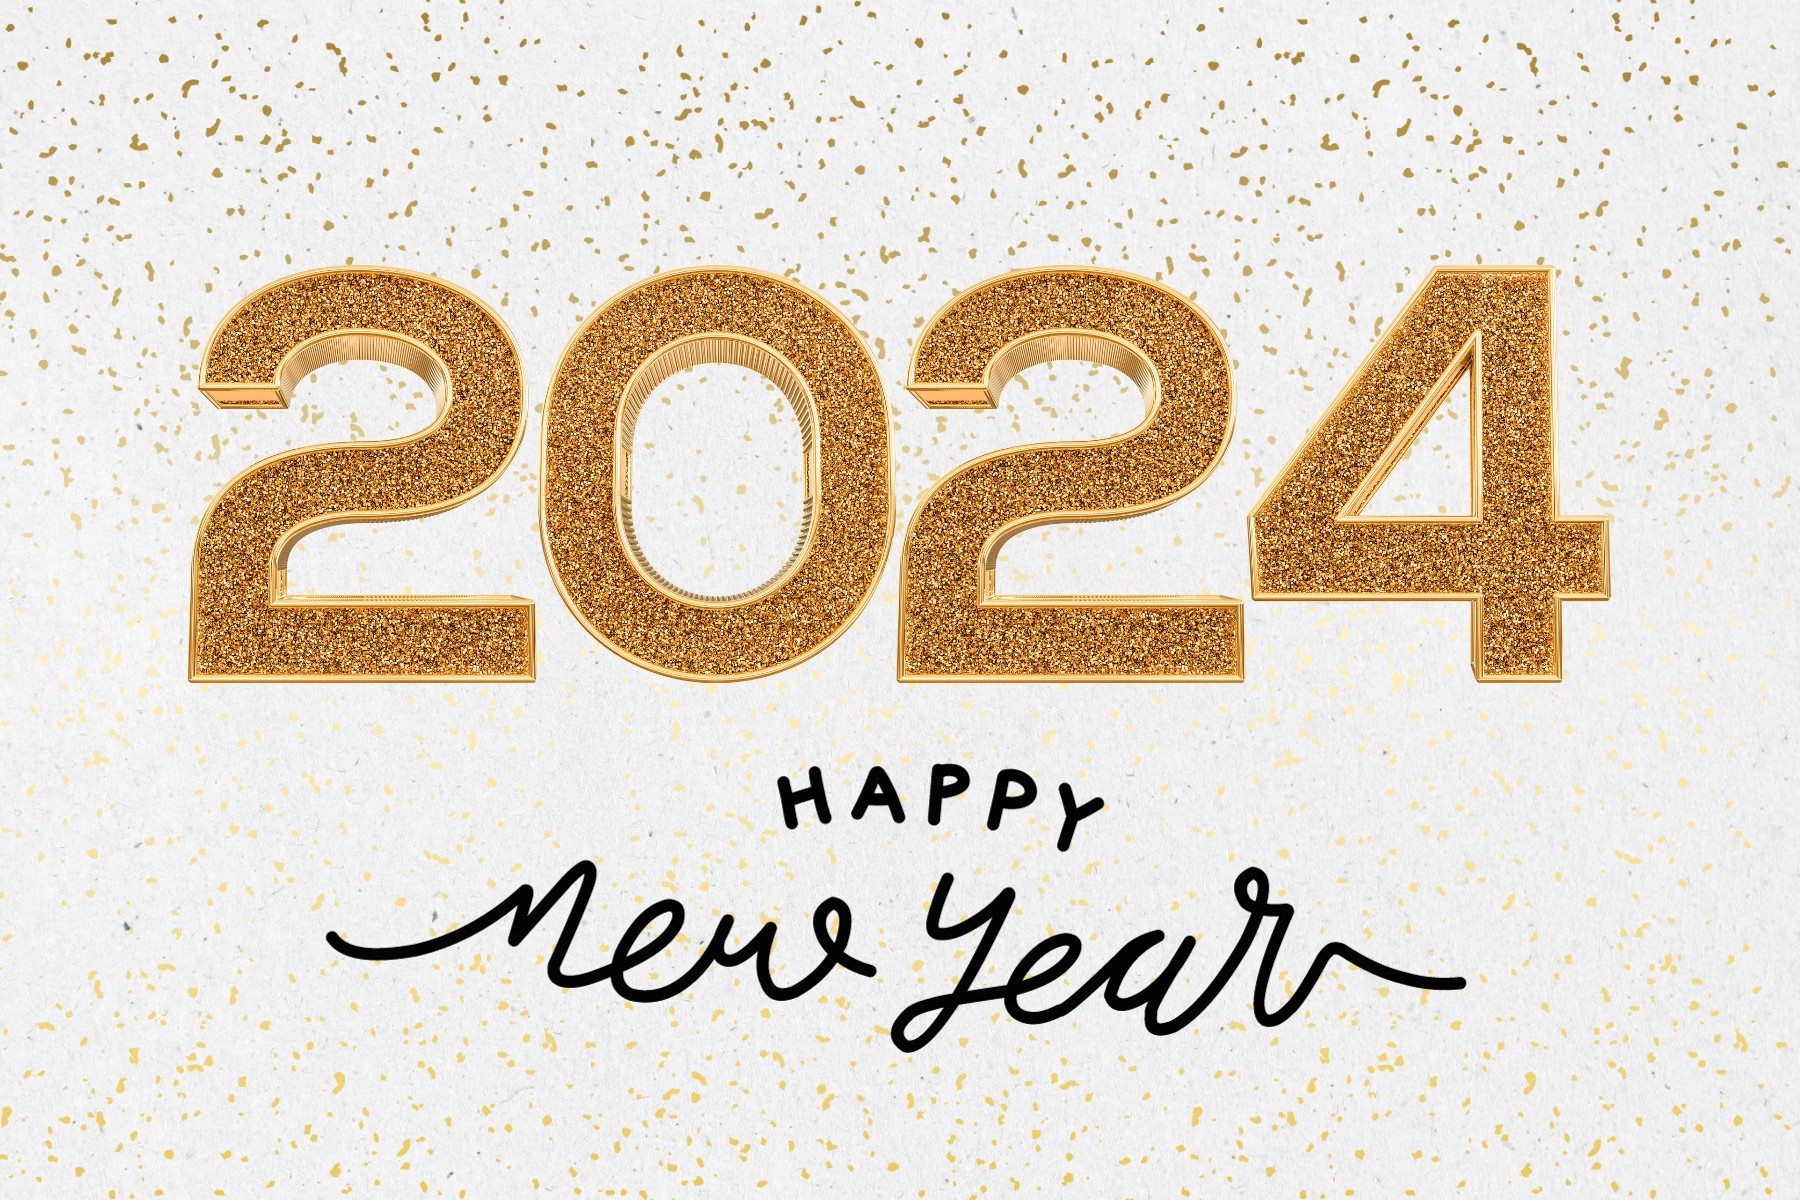 Happy new year 2023 gold numbers white background.jpg